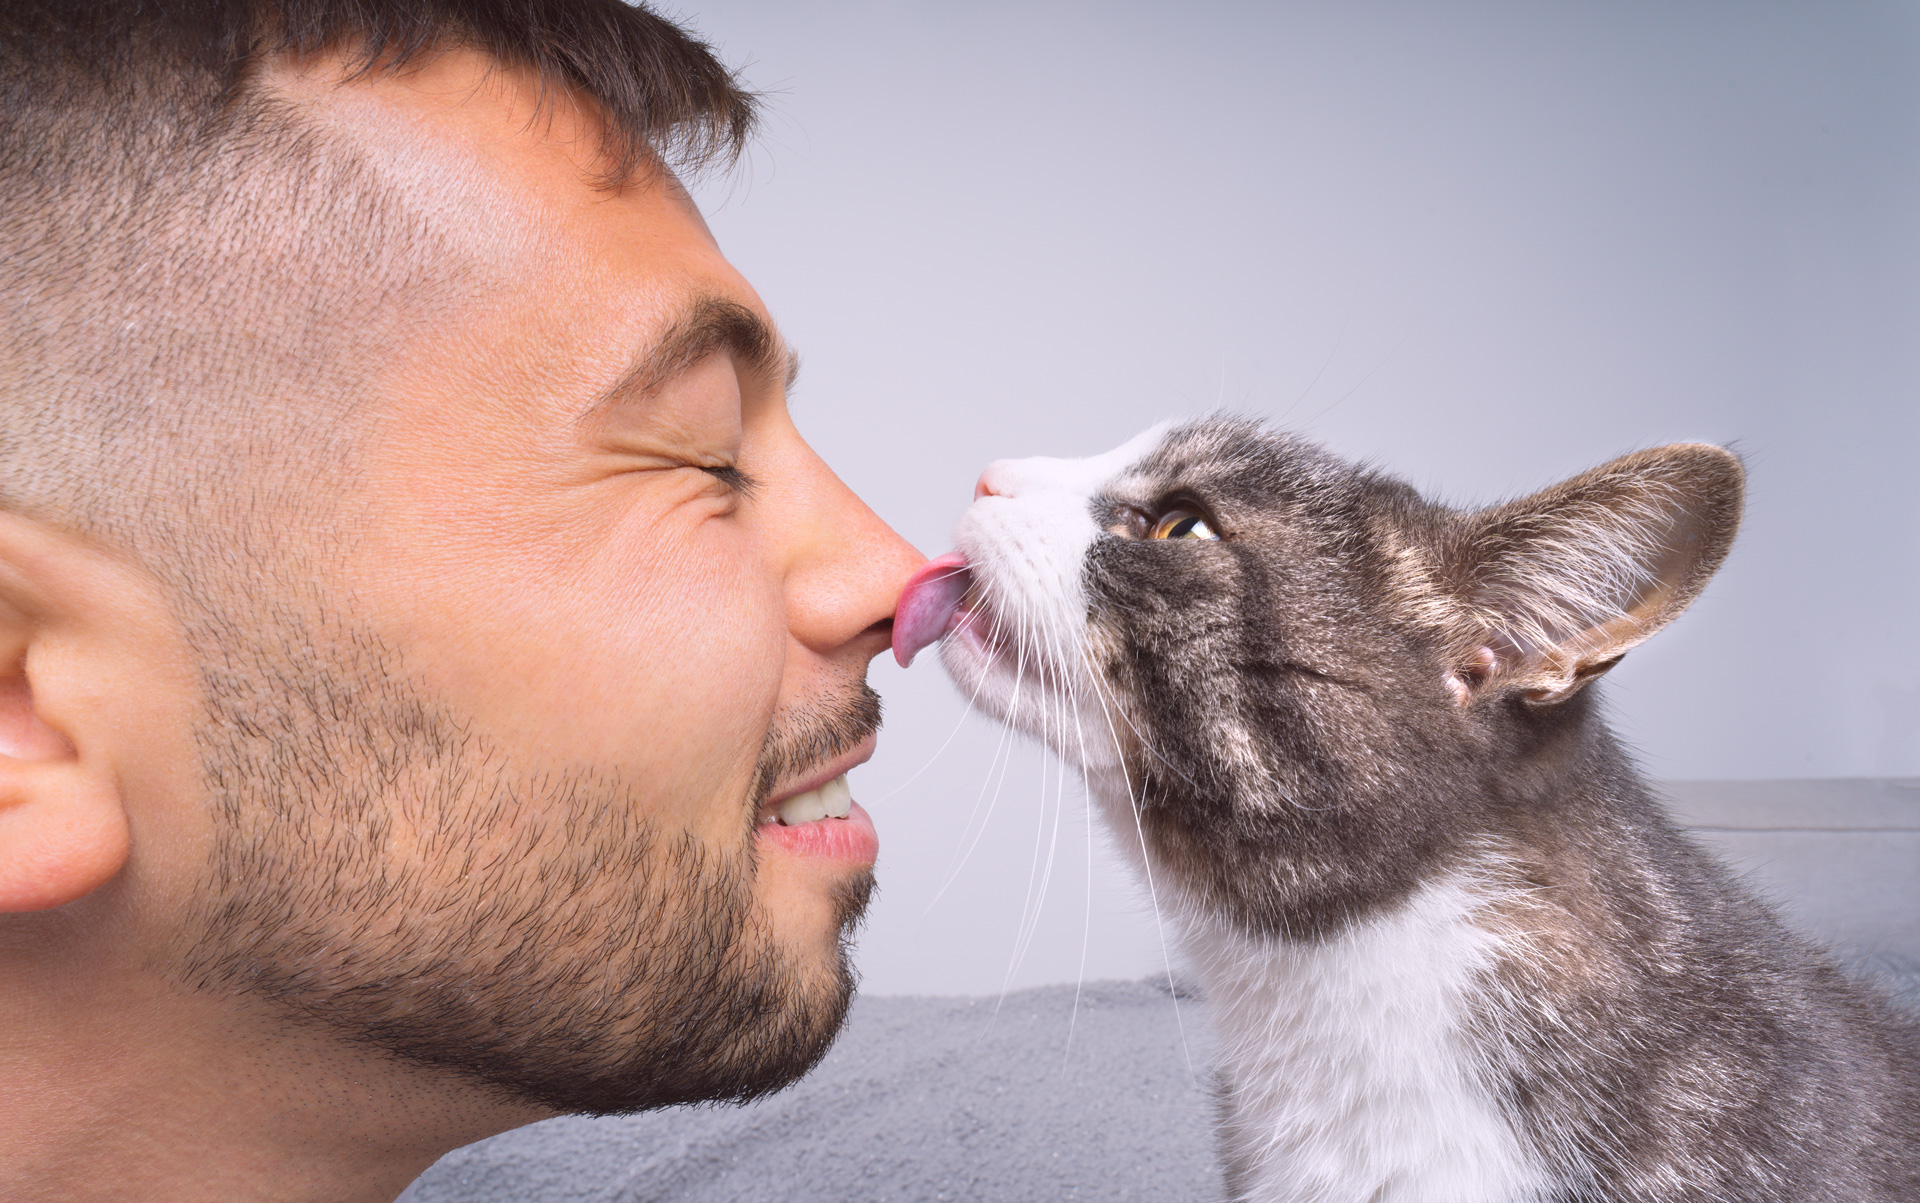 Why does my cat lick my face?